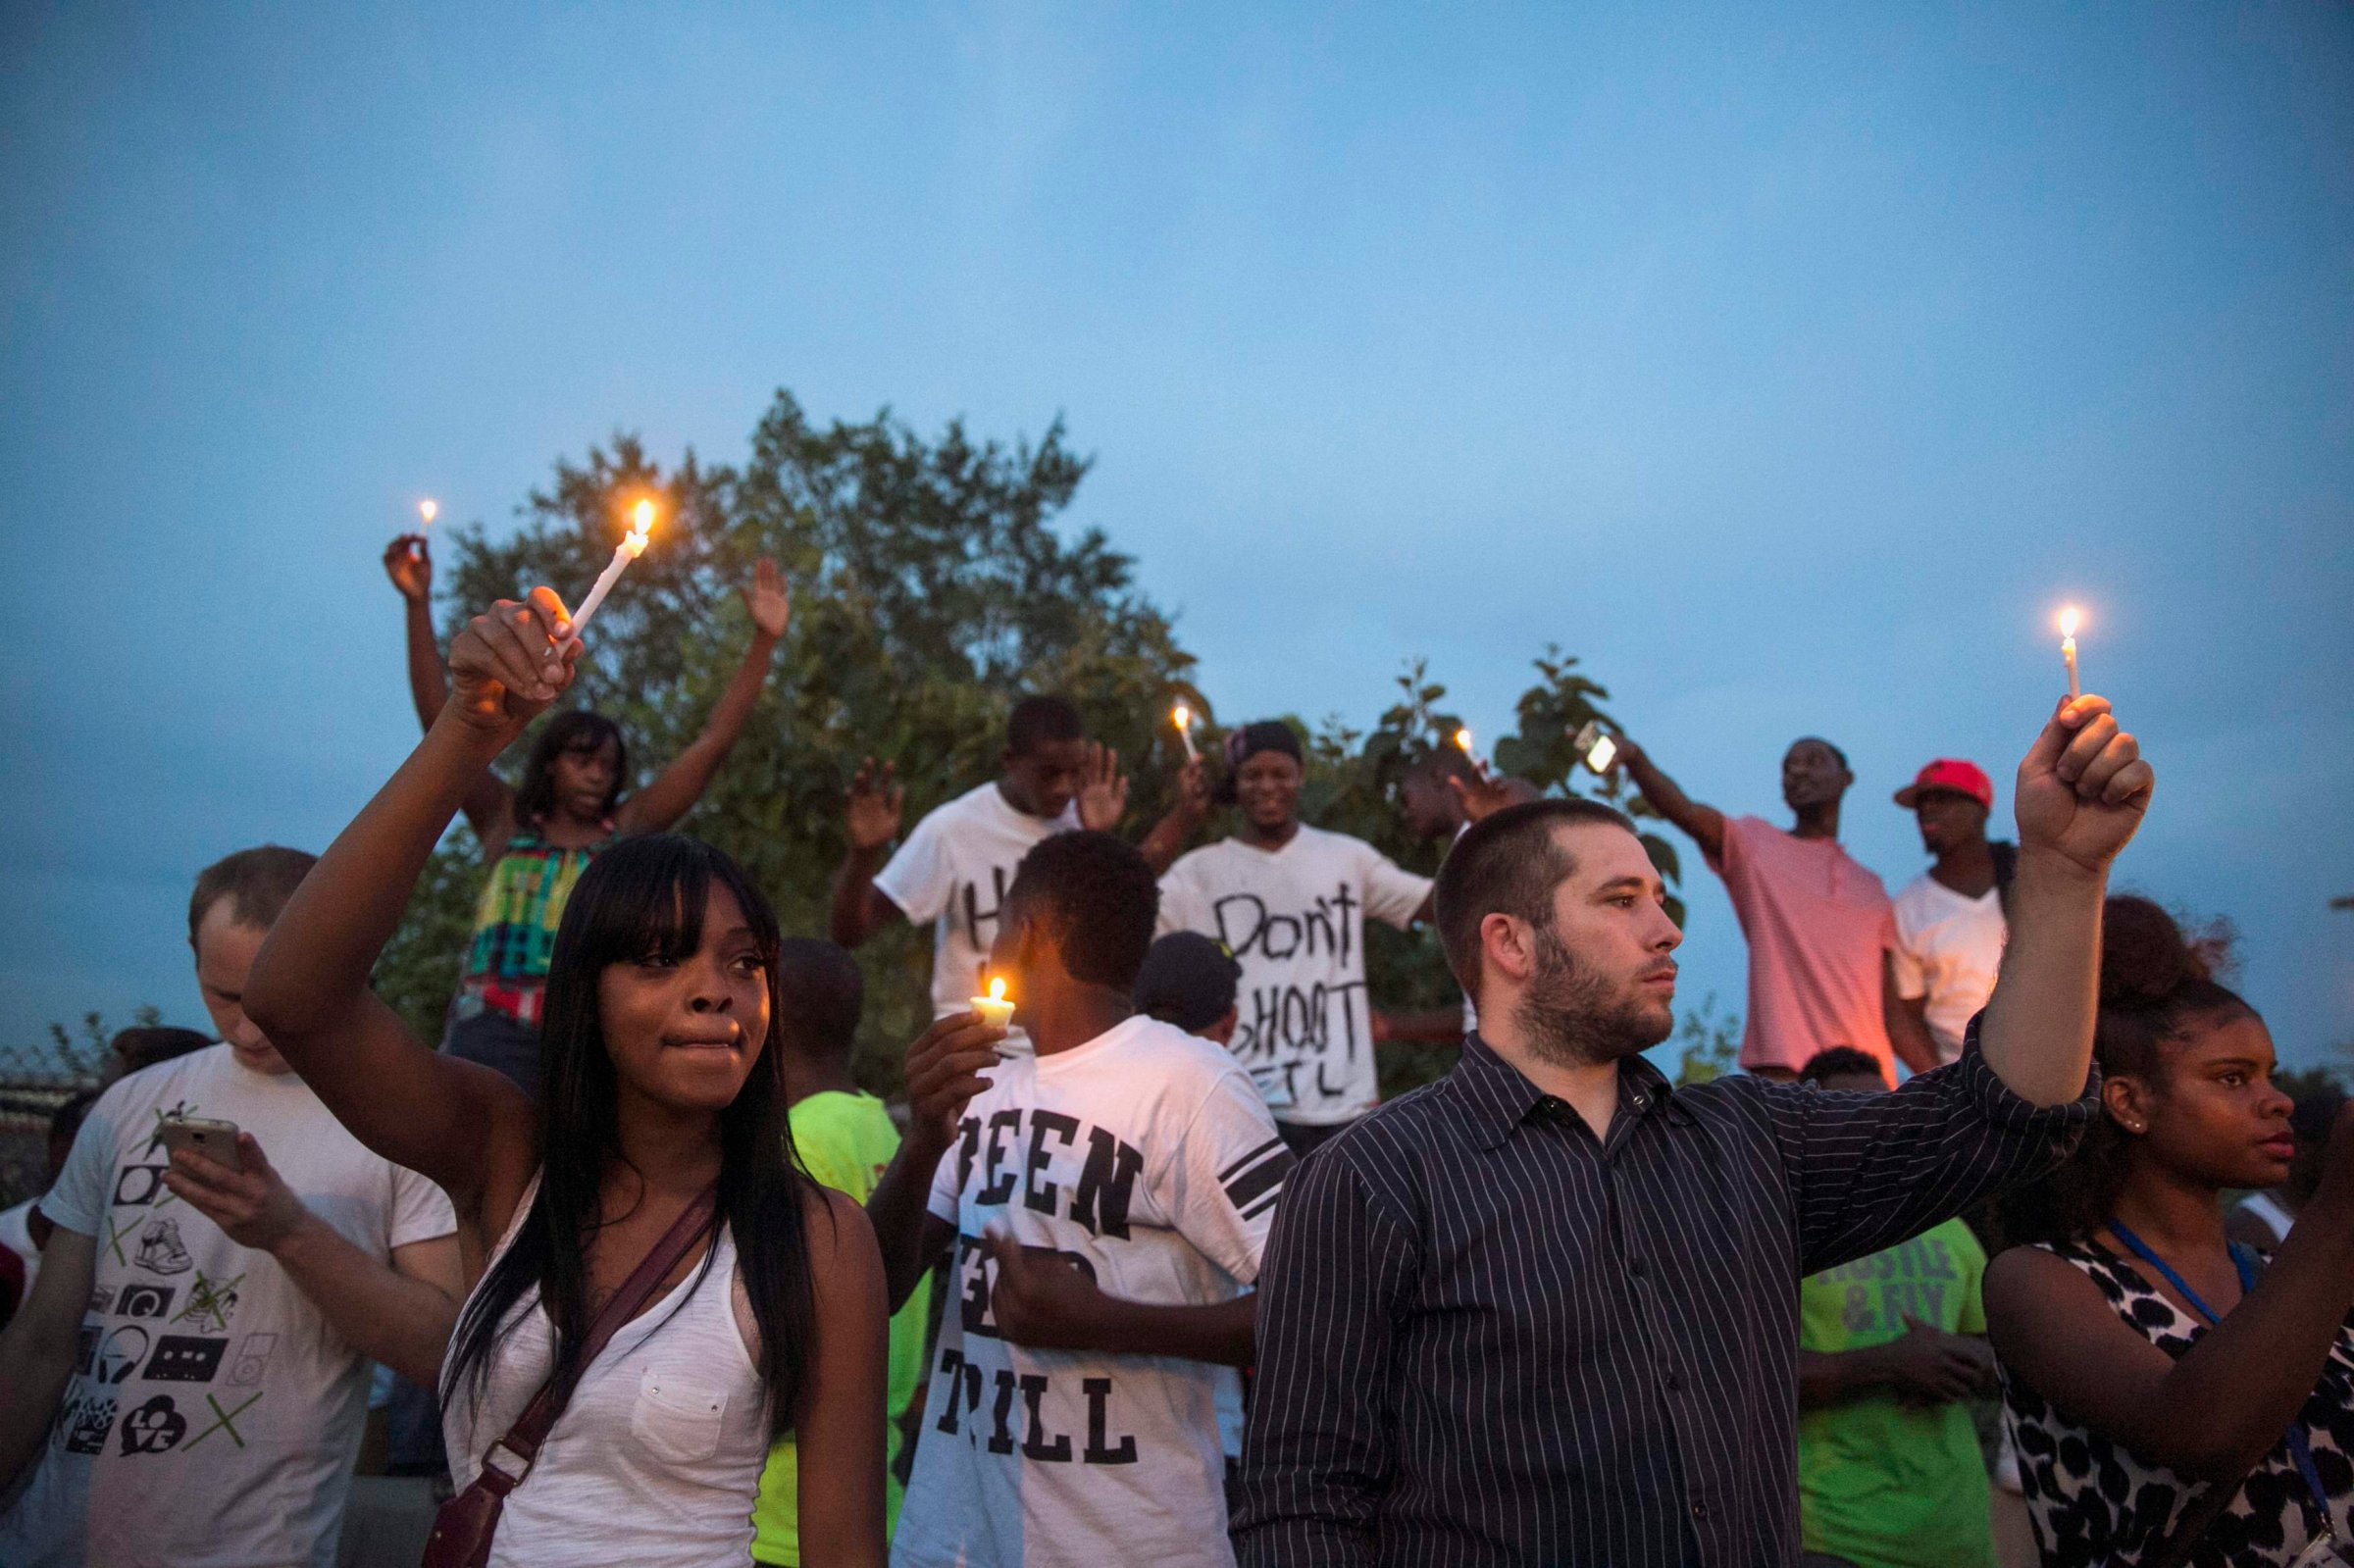 Protesters light candles as they take part in a peaceful demonstration, as communities react to the shooting of Michael Brown in Ferguson, Missouri August 14, 2014.